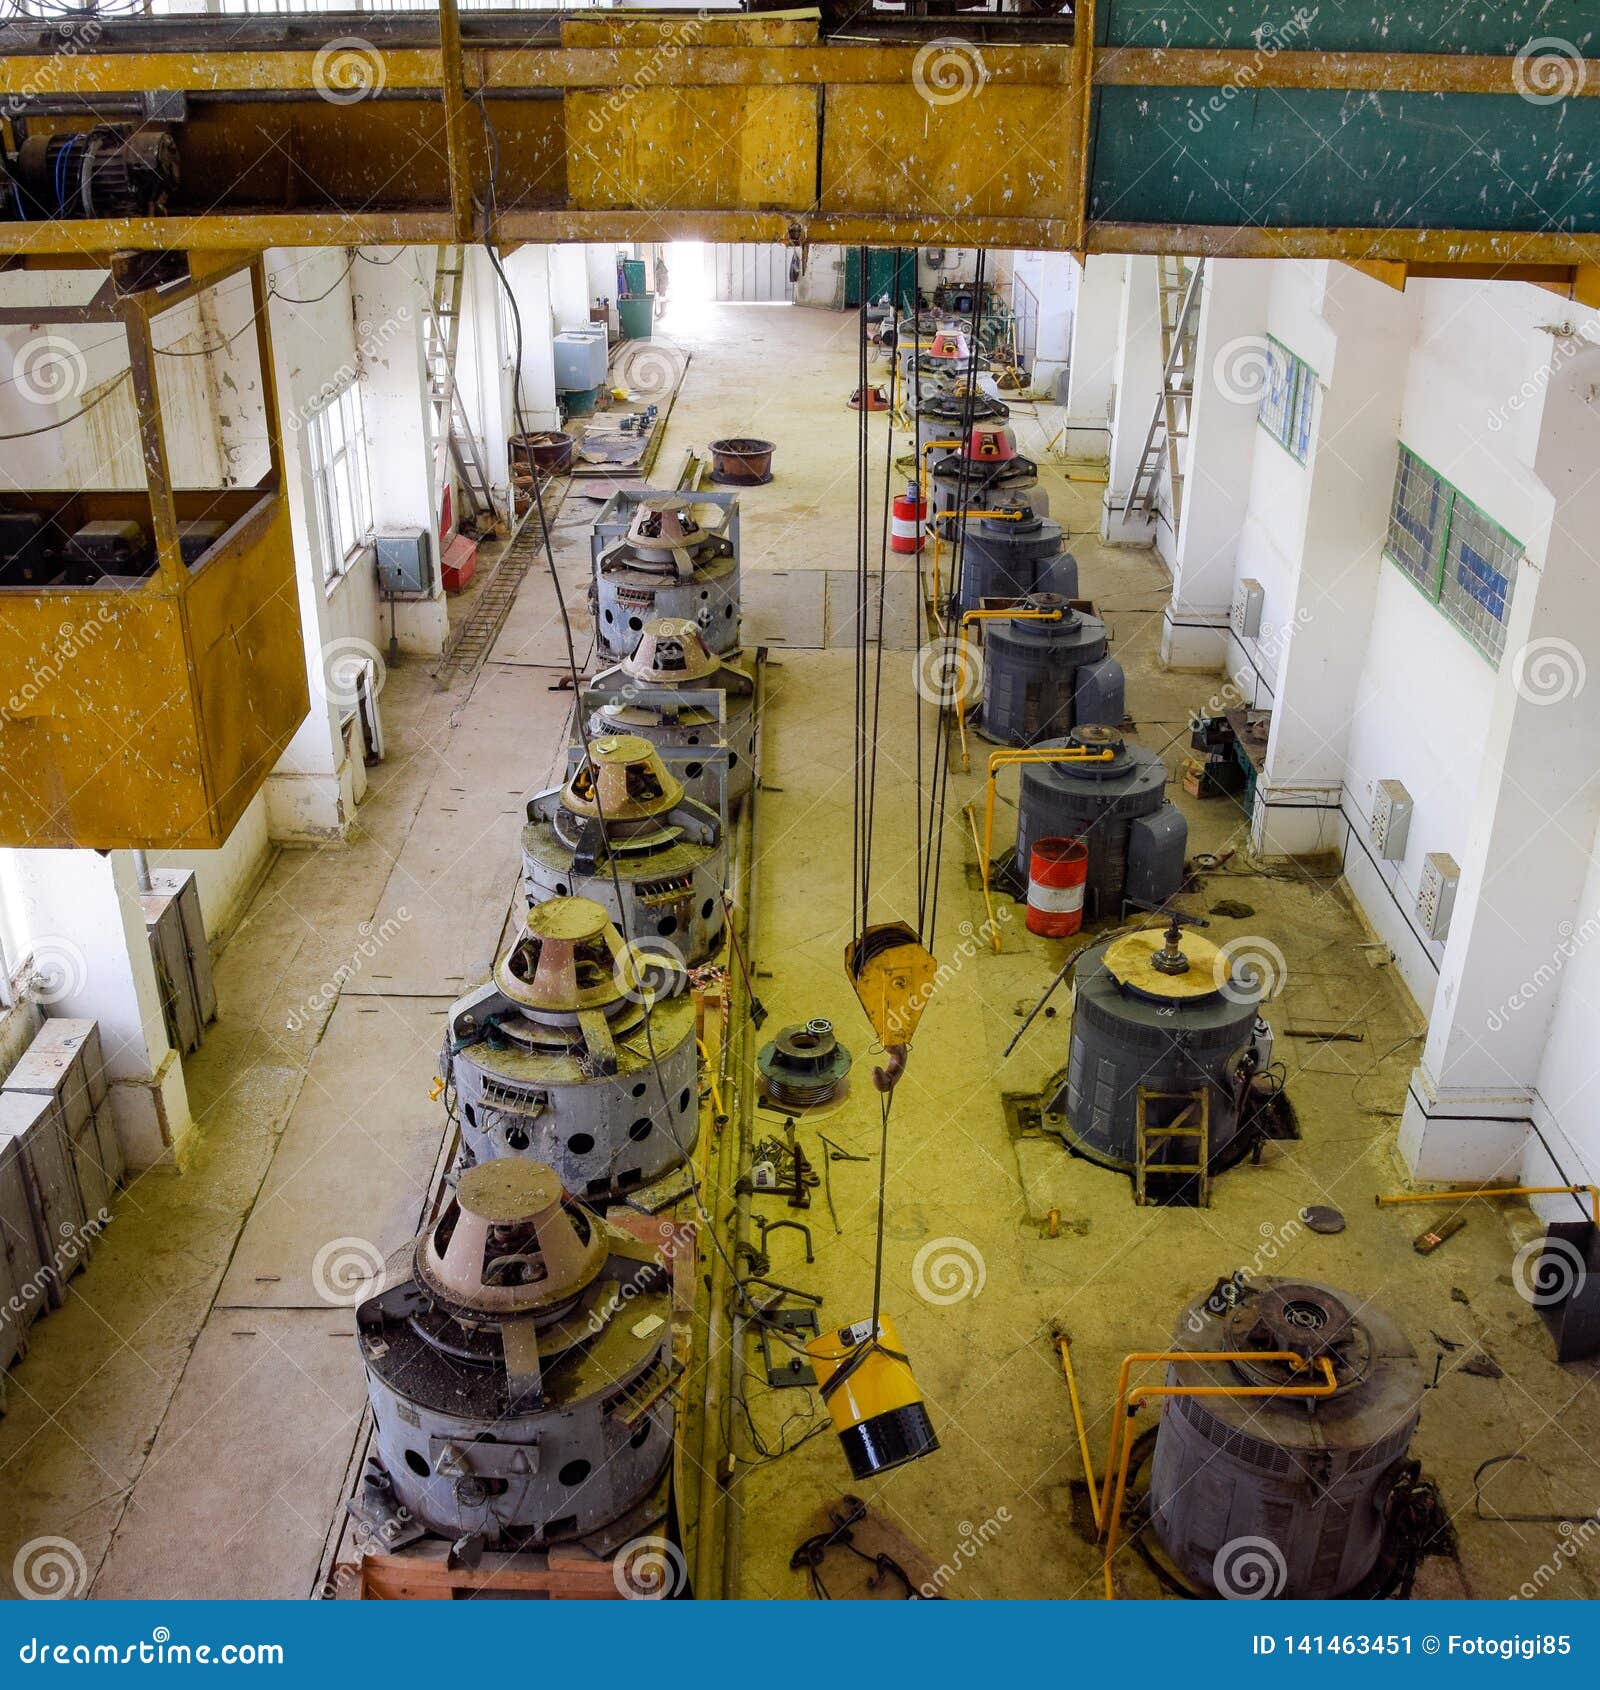 Engines Water Pumps at a Water Pumping Station. Pumping Irrig Image - Image motor, electric: 141463451